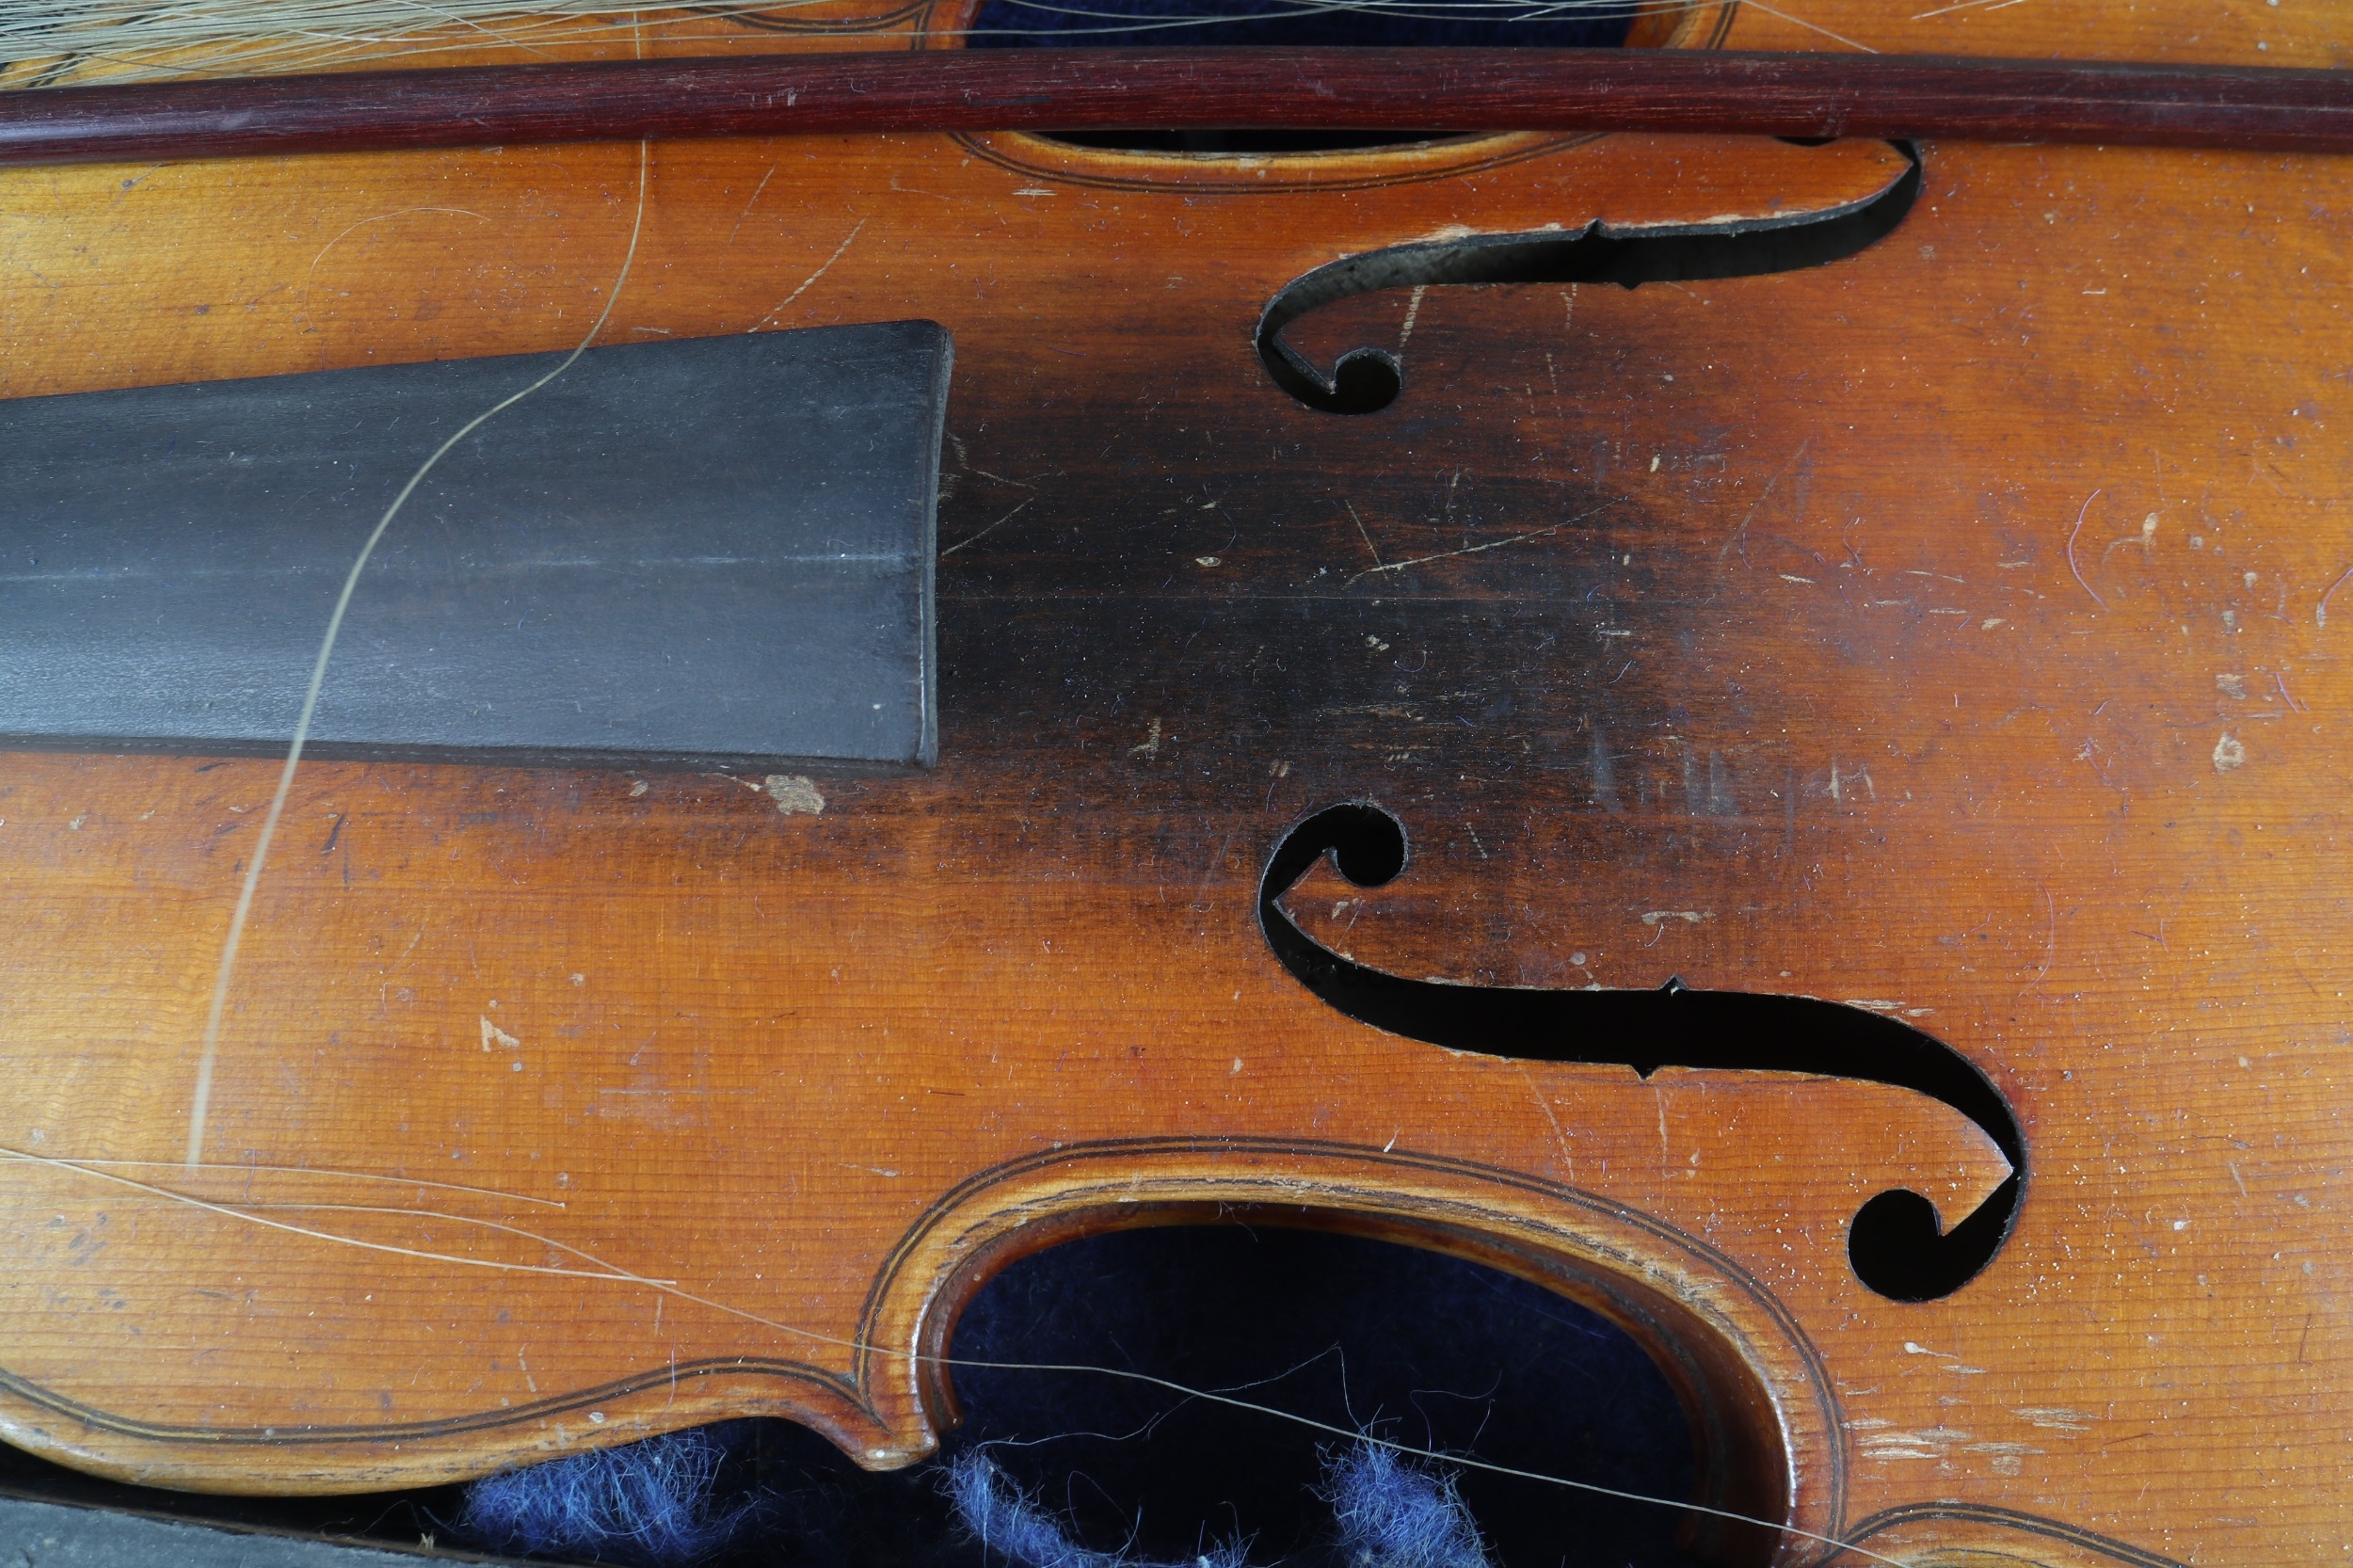 A student's violin and bow, in a wooden case, Violin is 23" long - Image 2 of 3